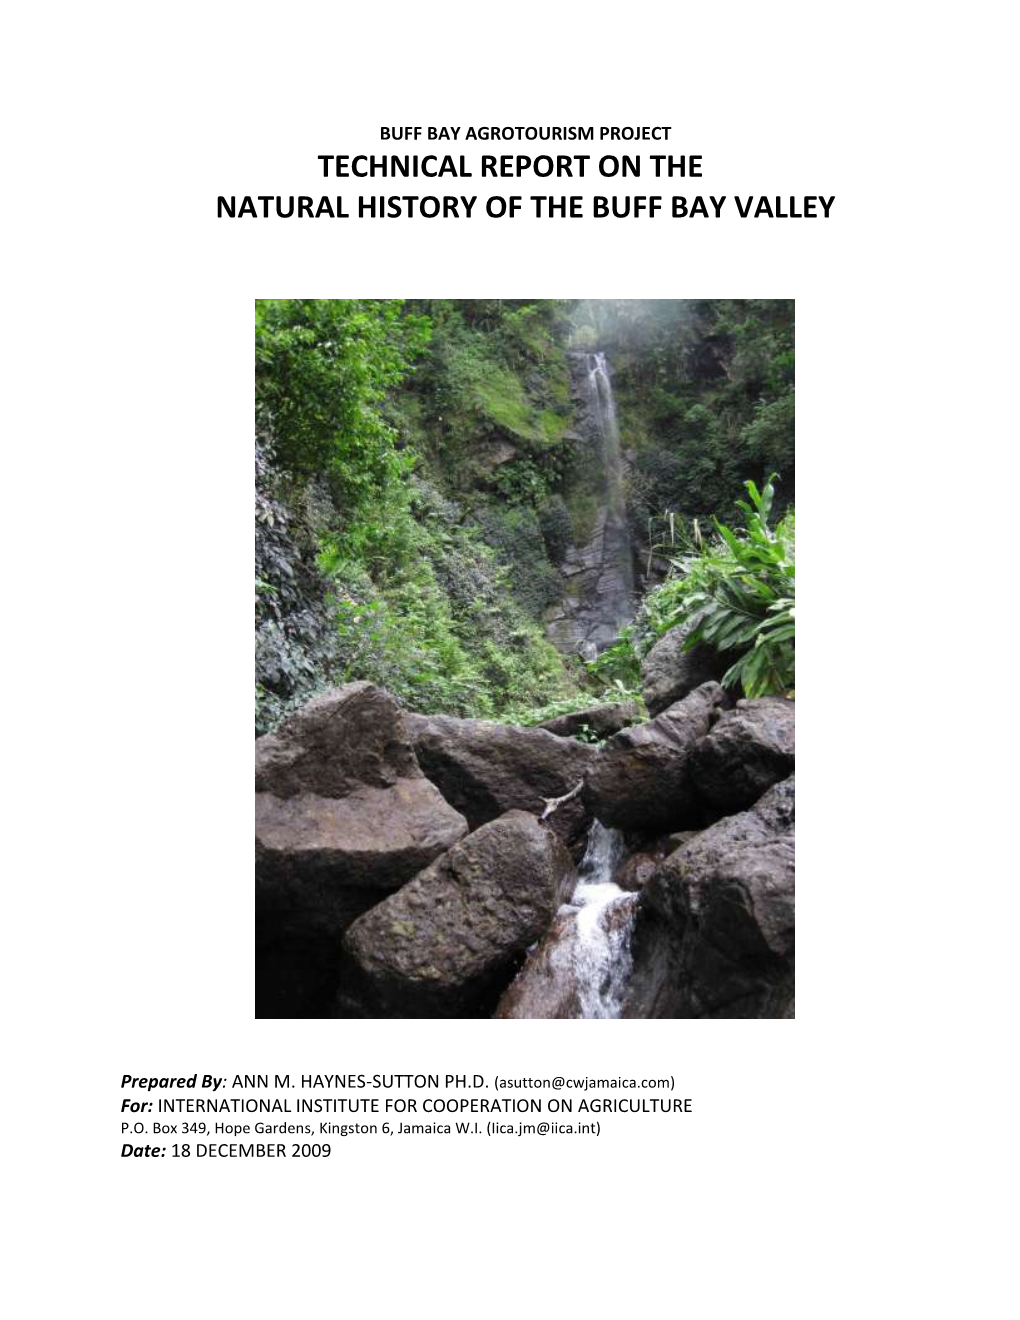 Technical Report on the Natural History of the Buff Bay Valley